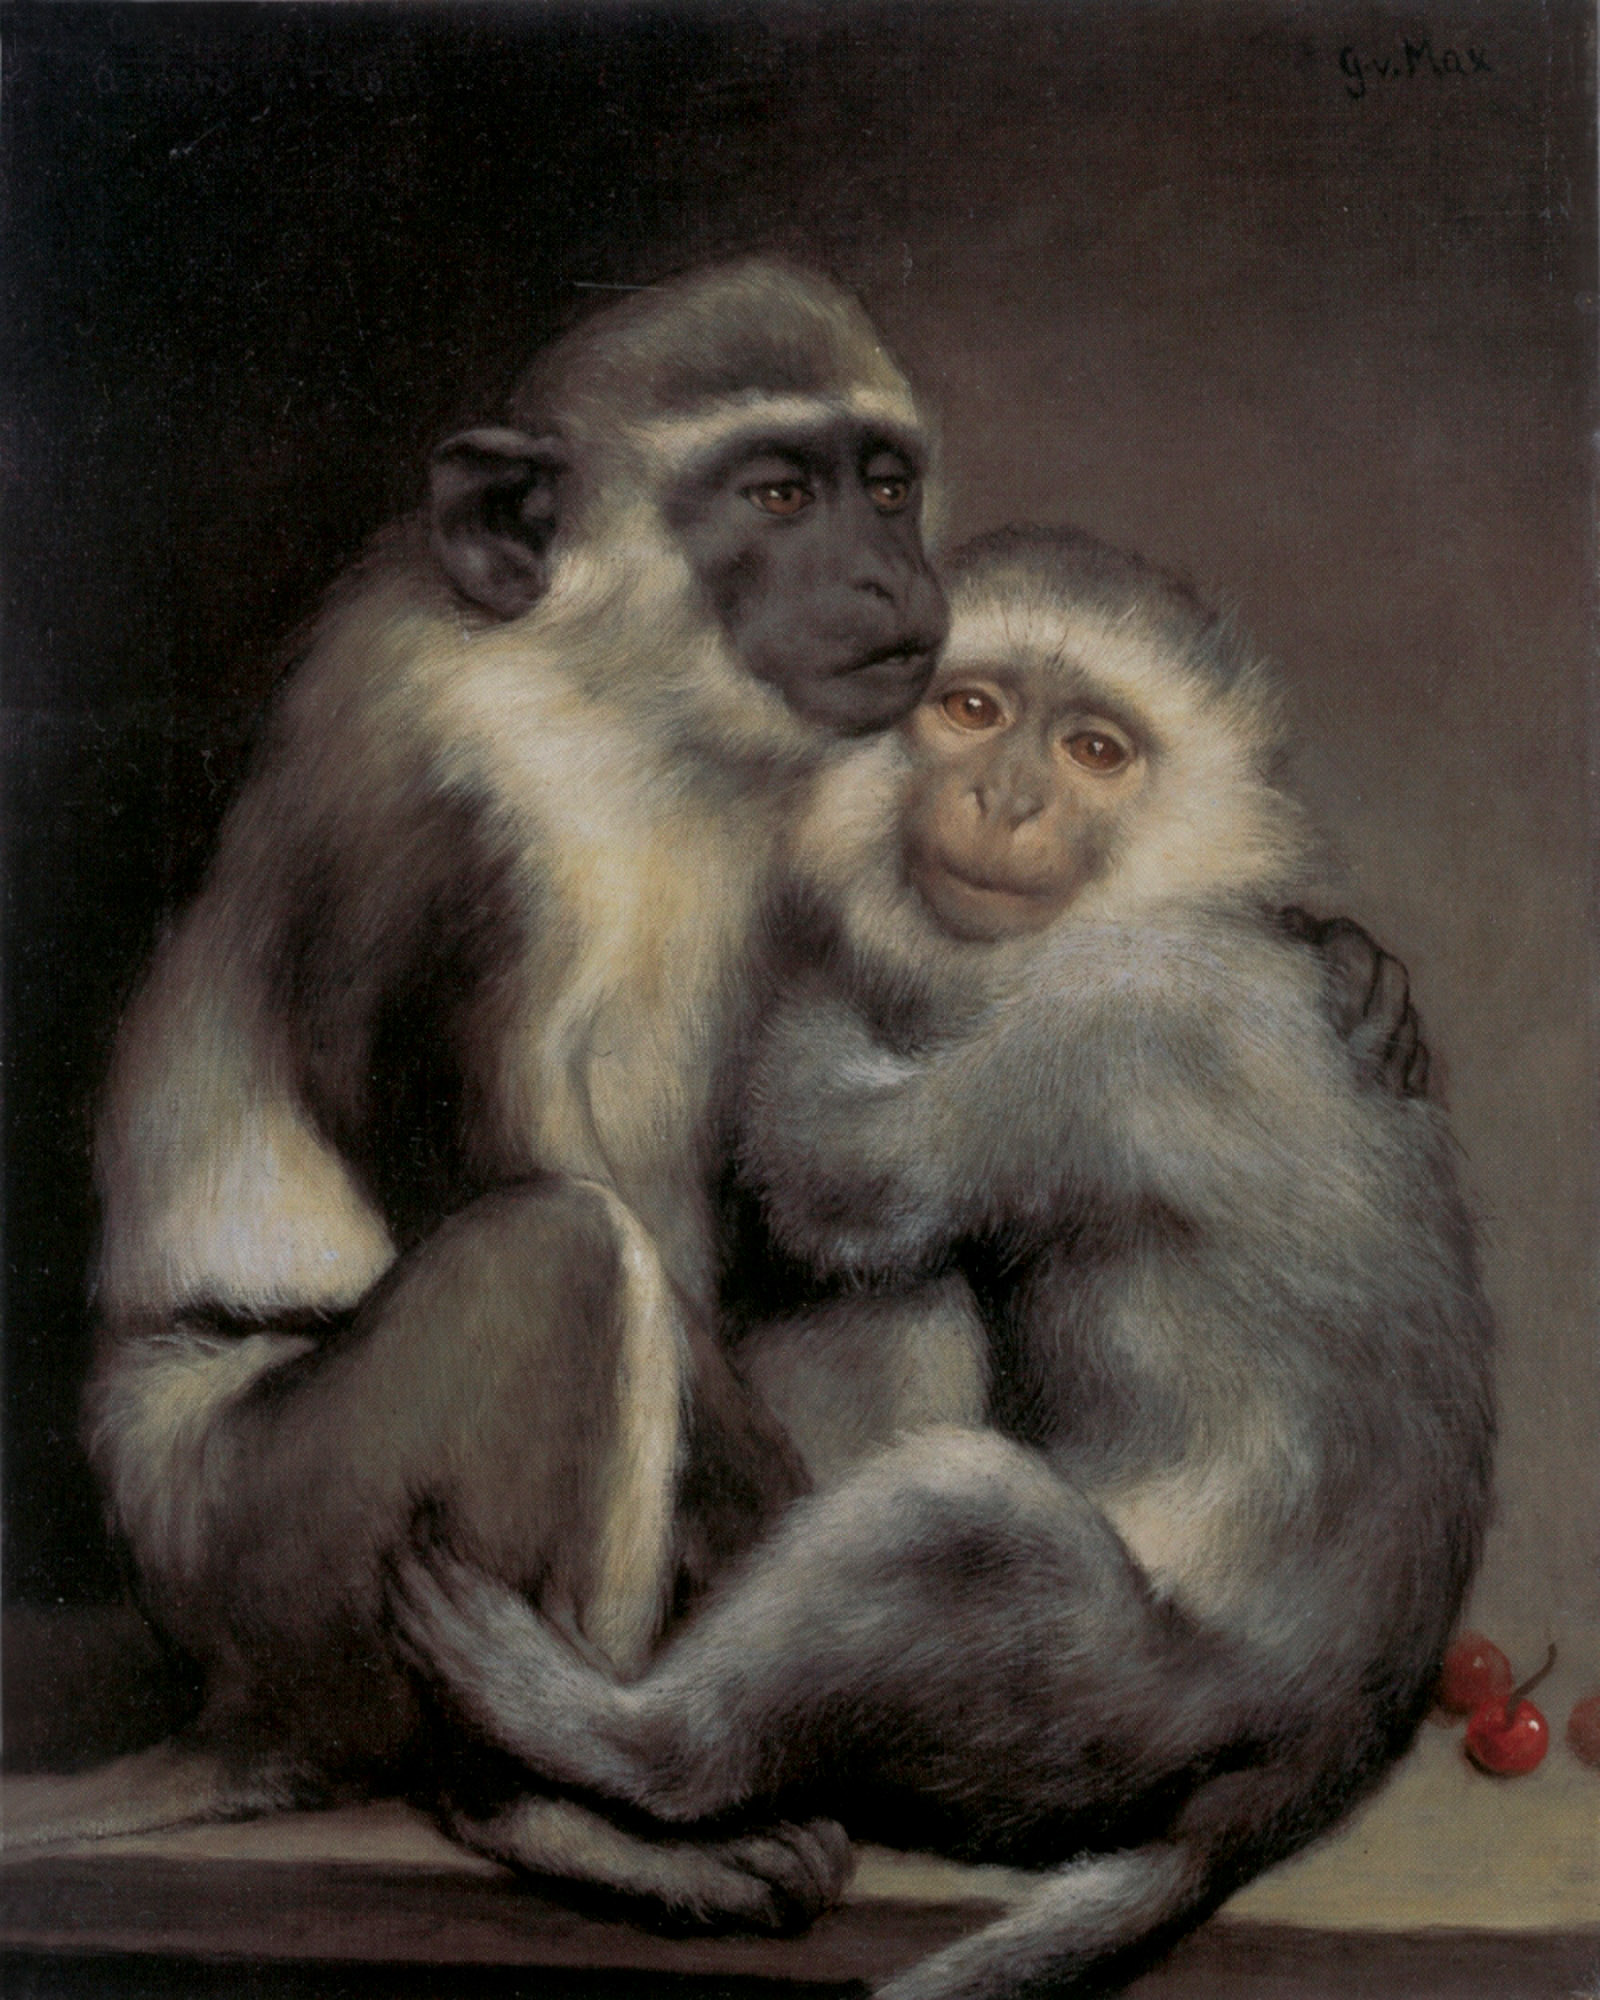 A painting of two monkeys